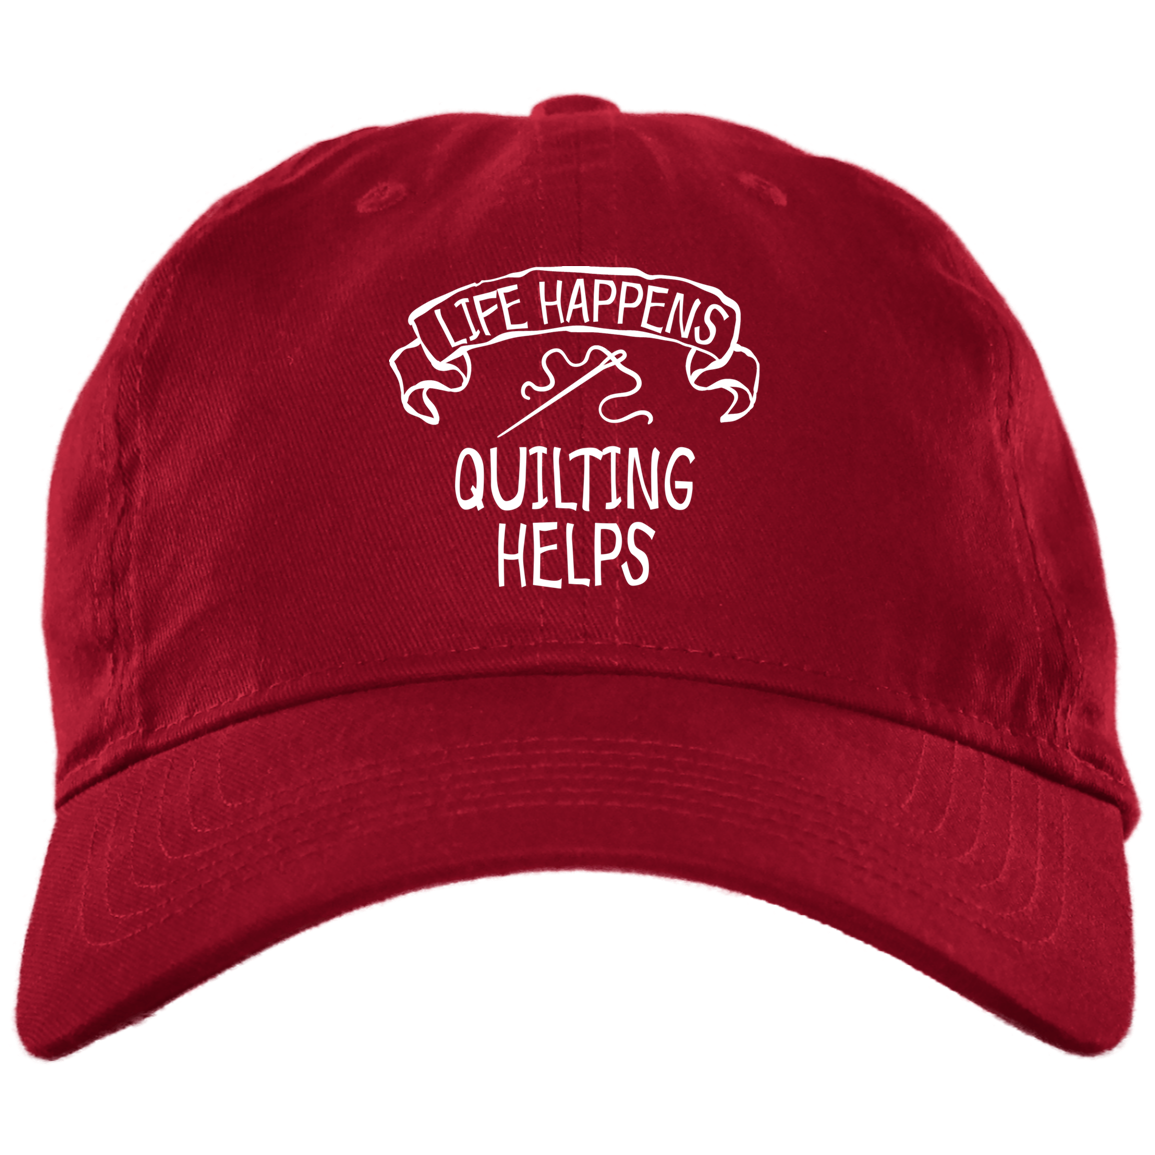 Life Happens - Quilting Helps Brushed Twill Unstructured Dad Cap